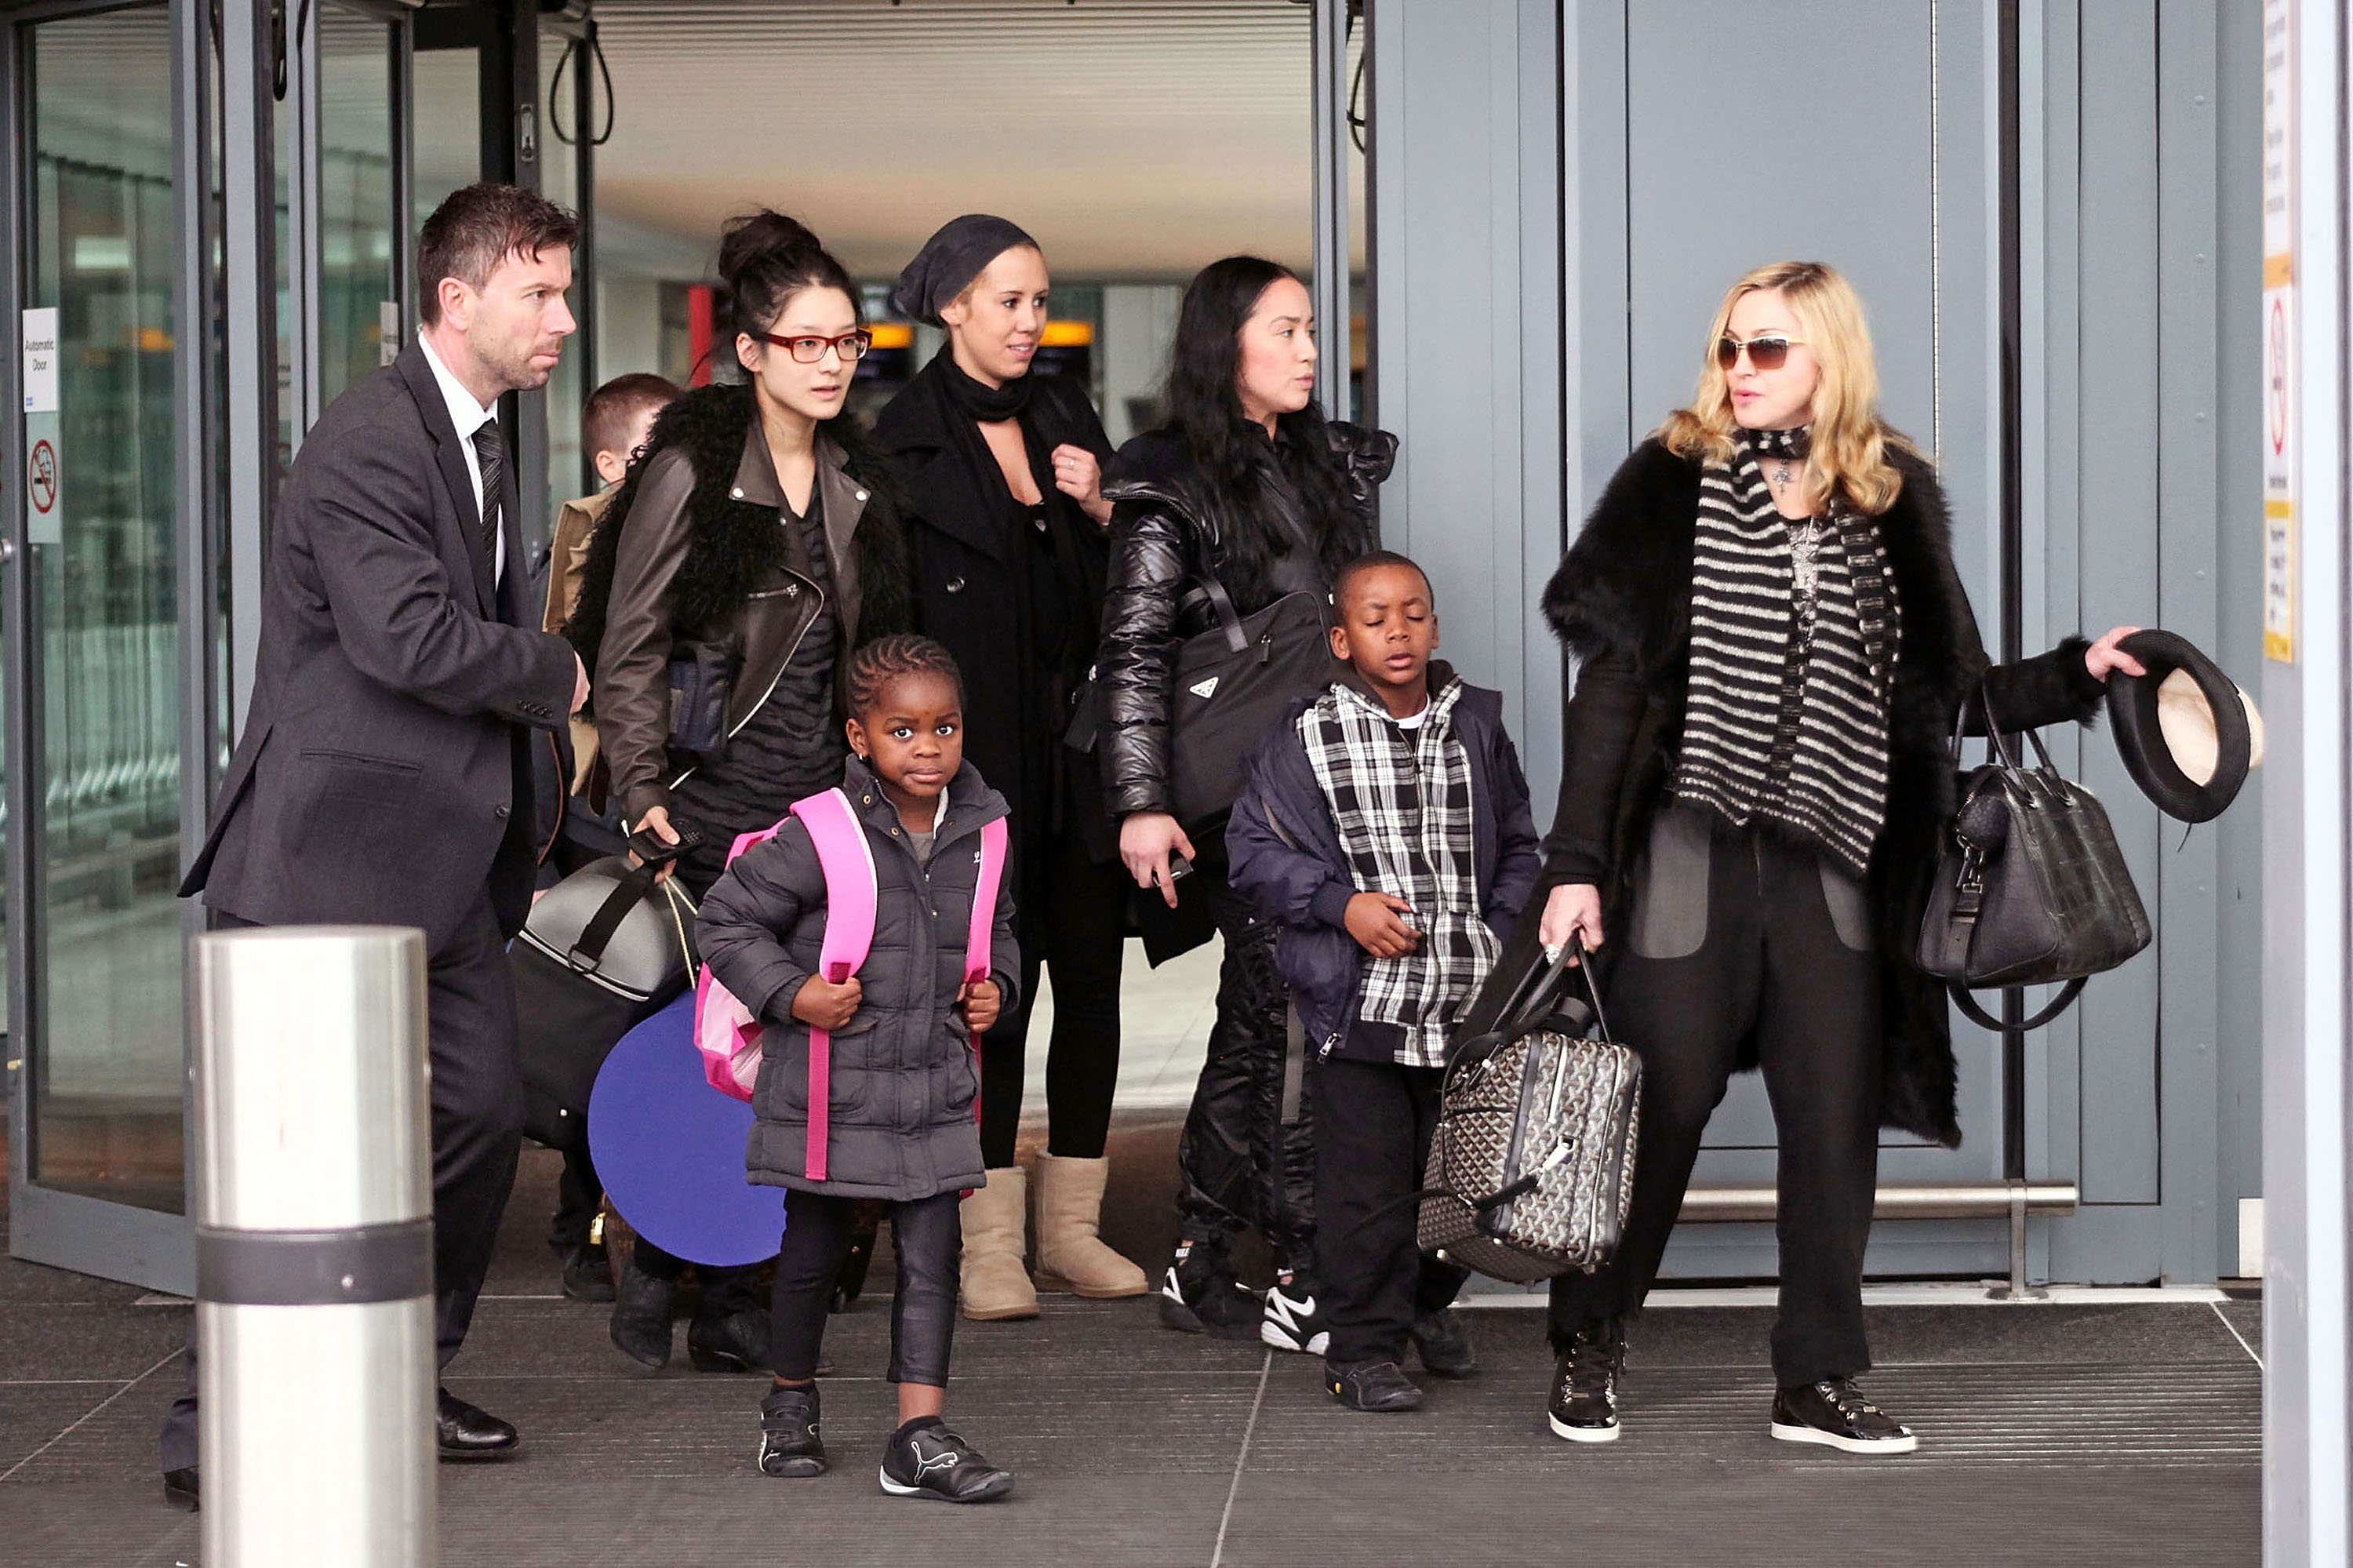 Madonna photographed at Heathrow Airport with her children on April 2, 2011 in London, United Kingdom. | Source: Getty Images